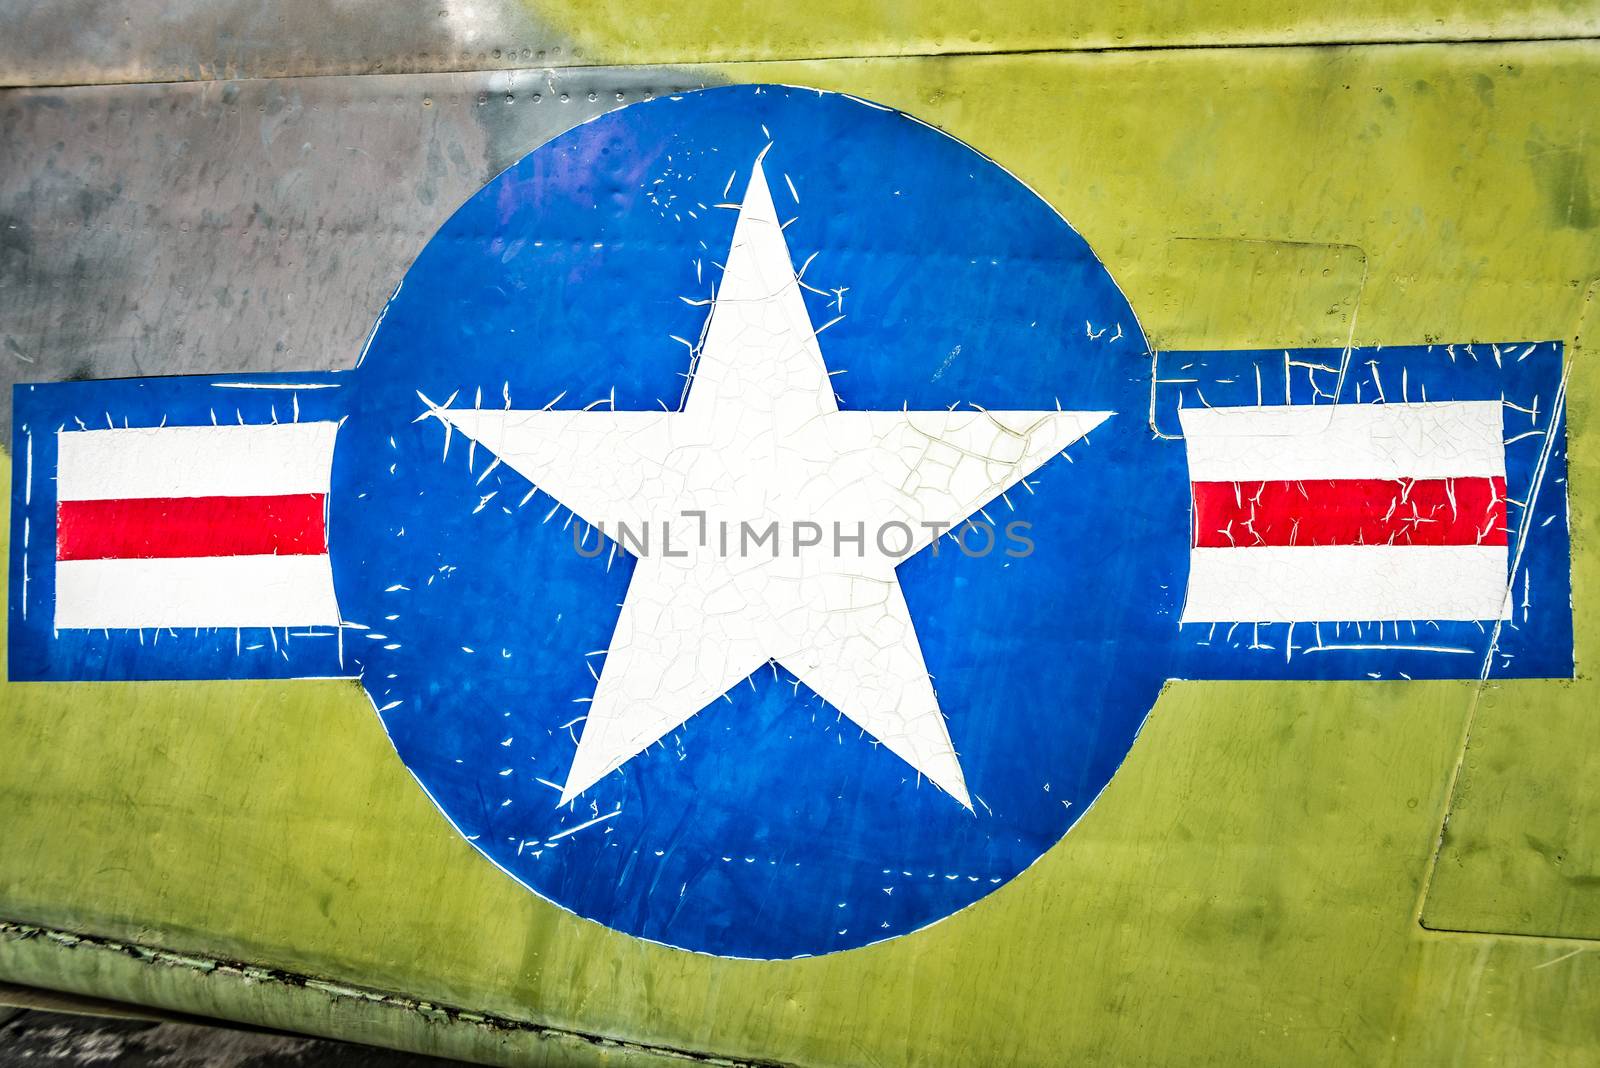 Military plane with star and stripe sign. by Yolshin